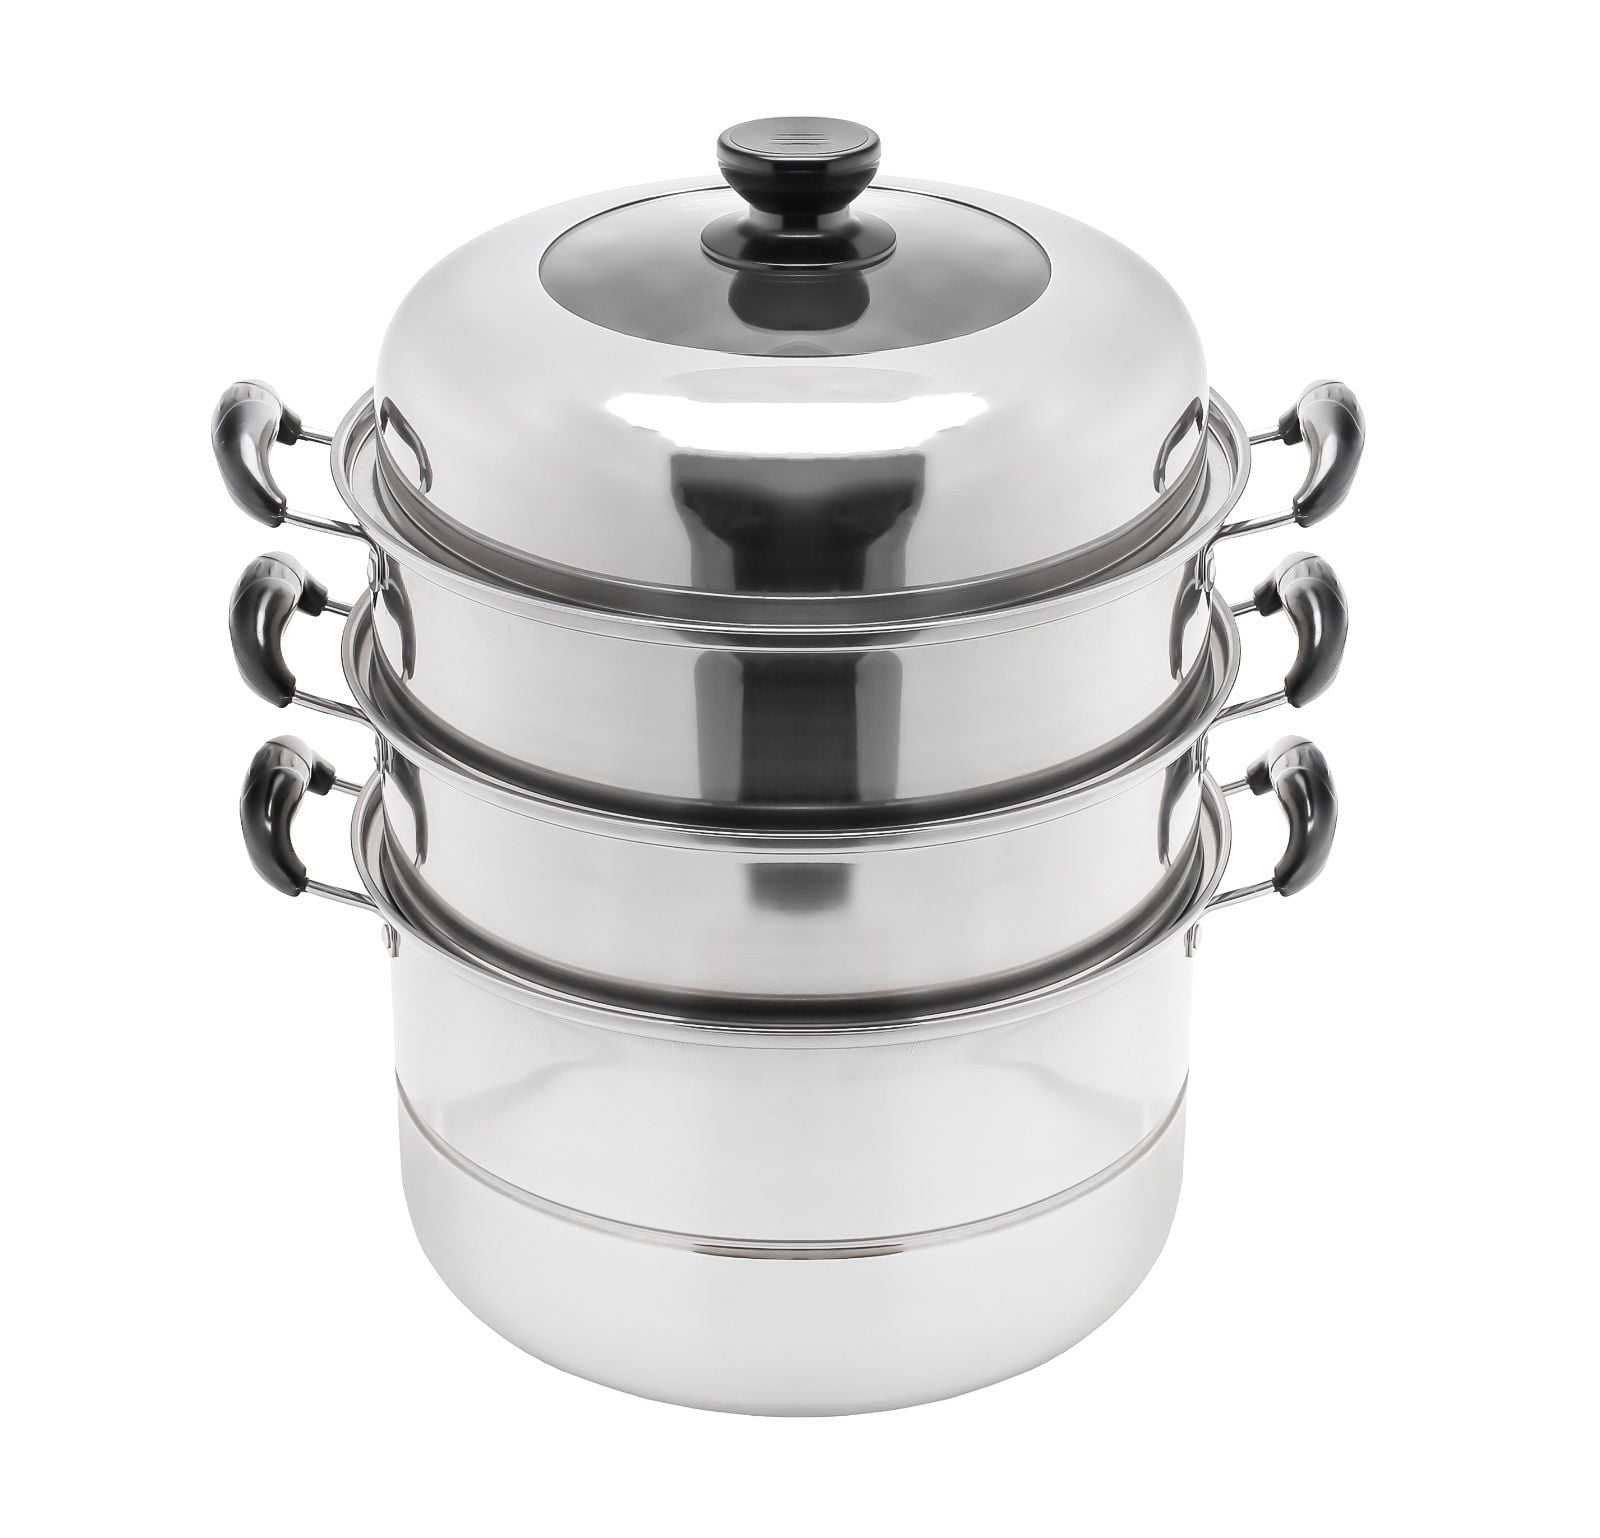 3 Tier 12‘’ Stainless Steel Steamer Set Steam Cookware Soup Pot with Lid  For Home Kitchen Cooker Seafoods Vegetable Steaming Silver